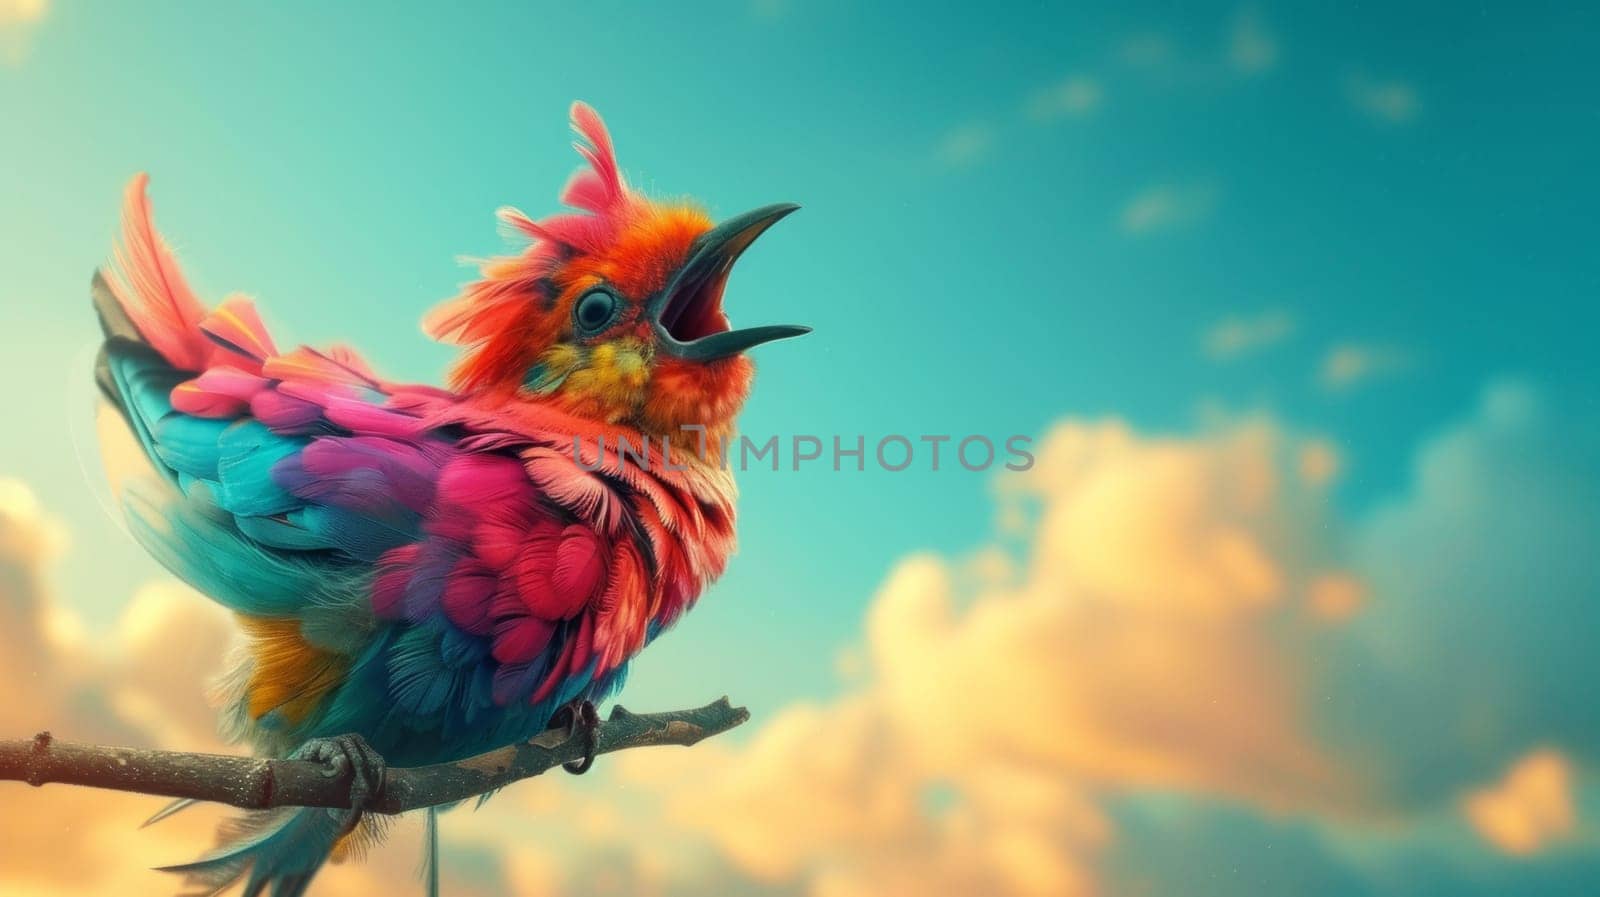 A colorful bird with a bright red beak sitting on top of a branch, AI by starush